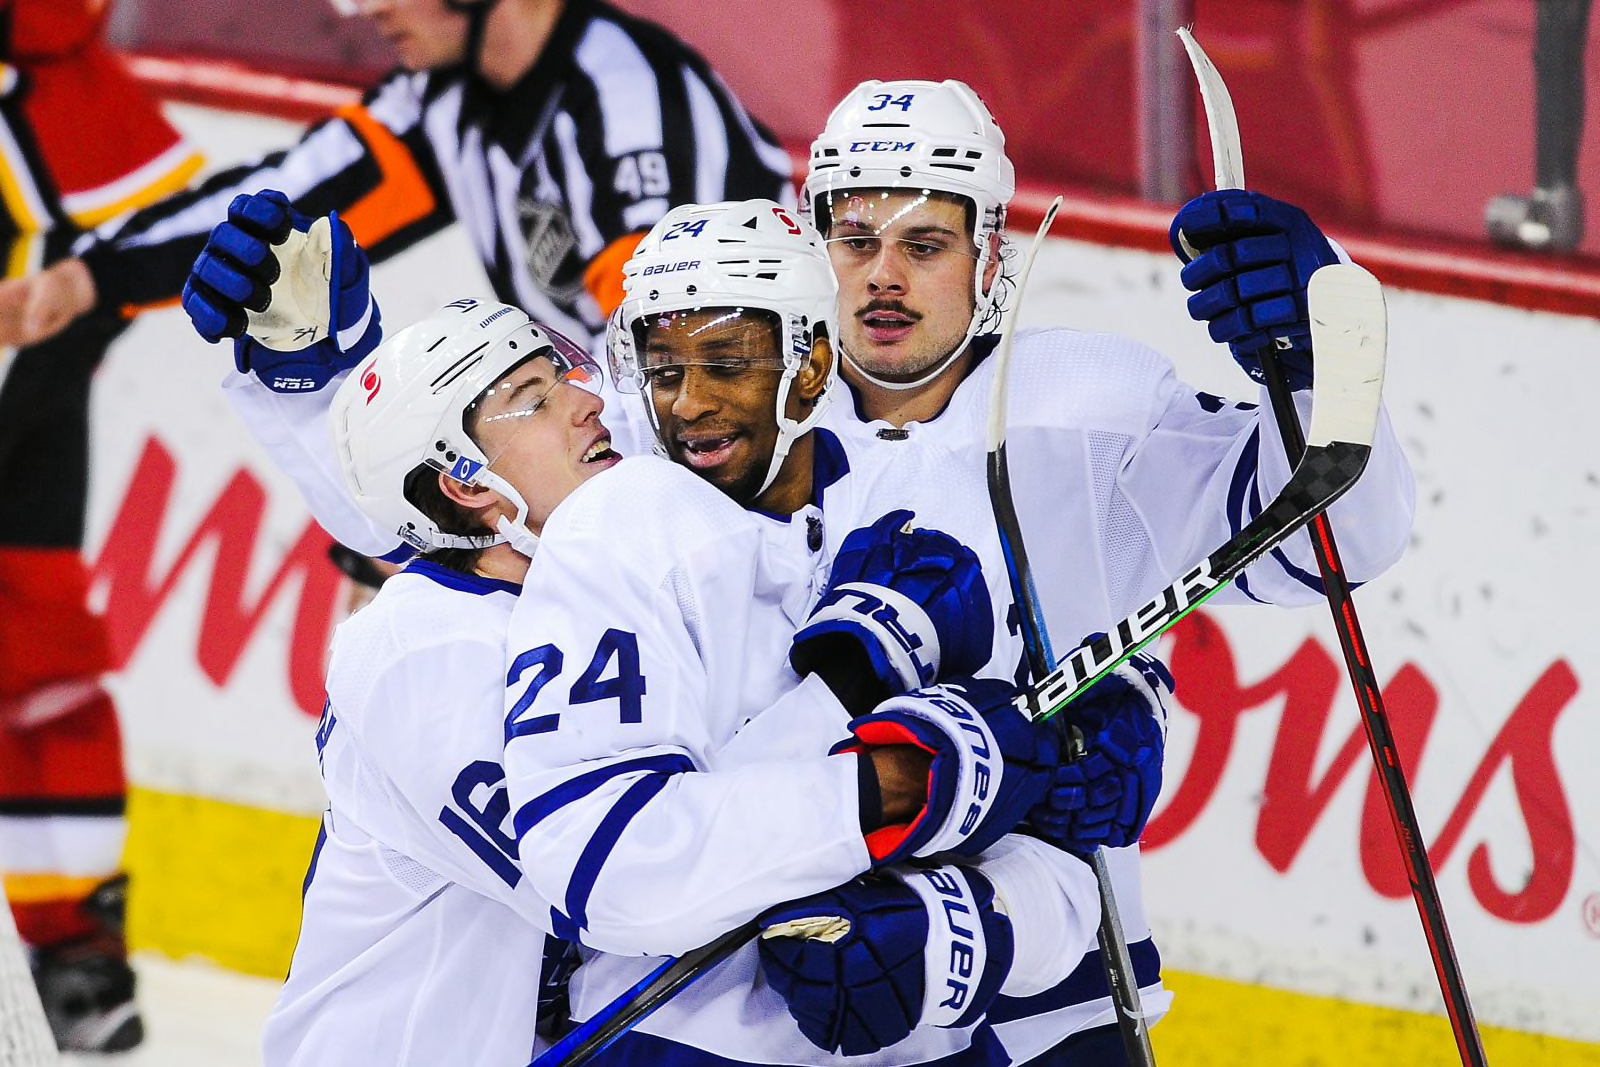 Wayne Simmonds returns to Maple Leafs after birth of second